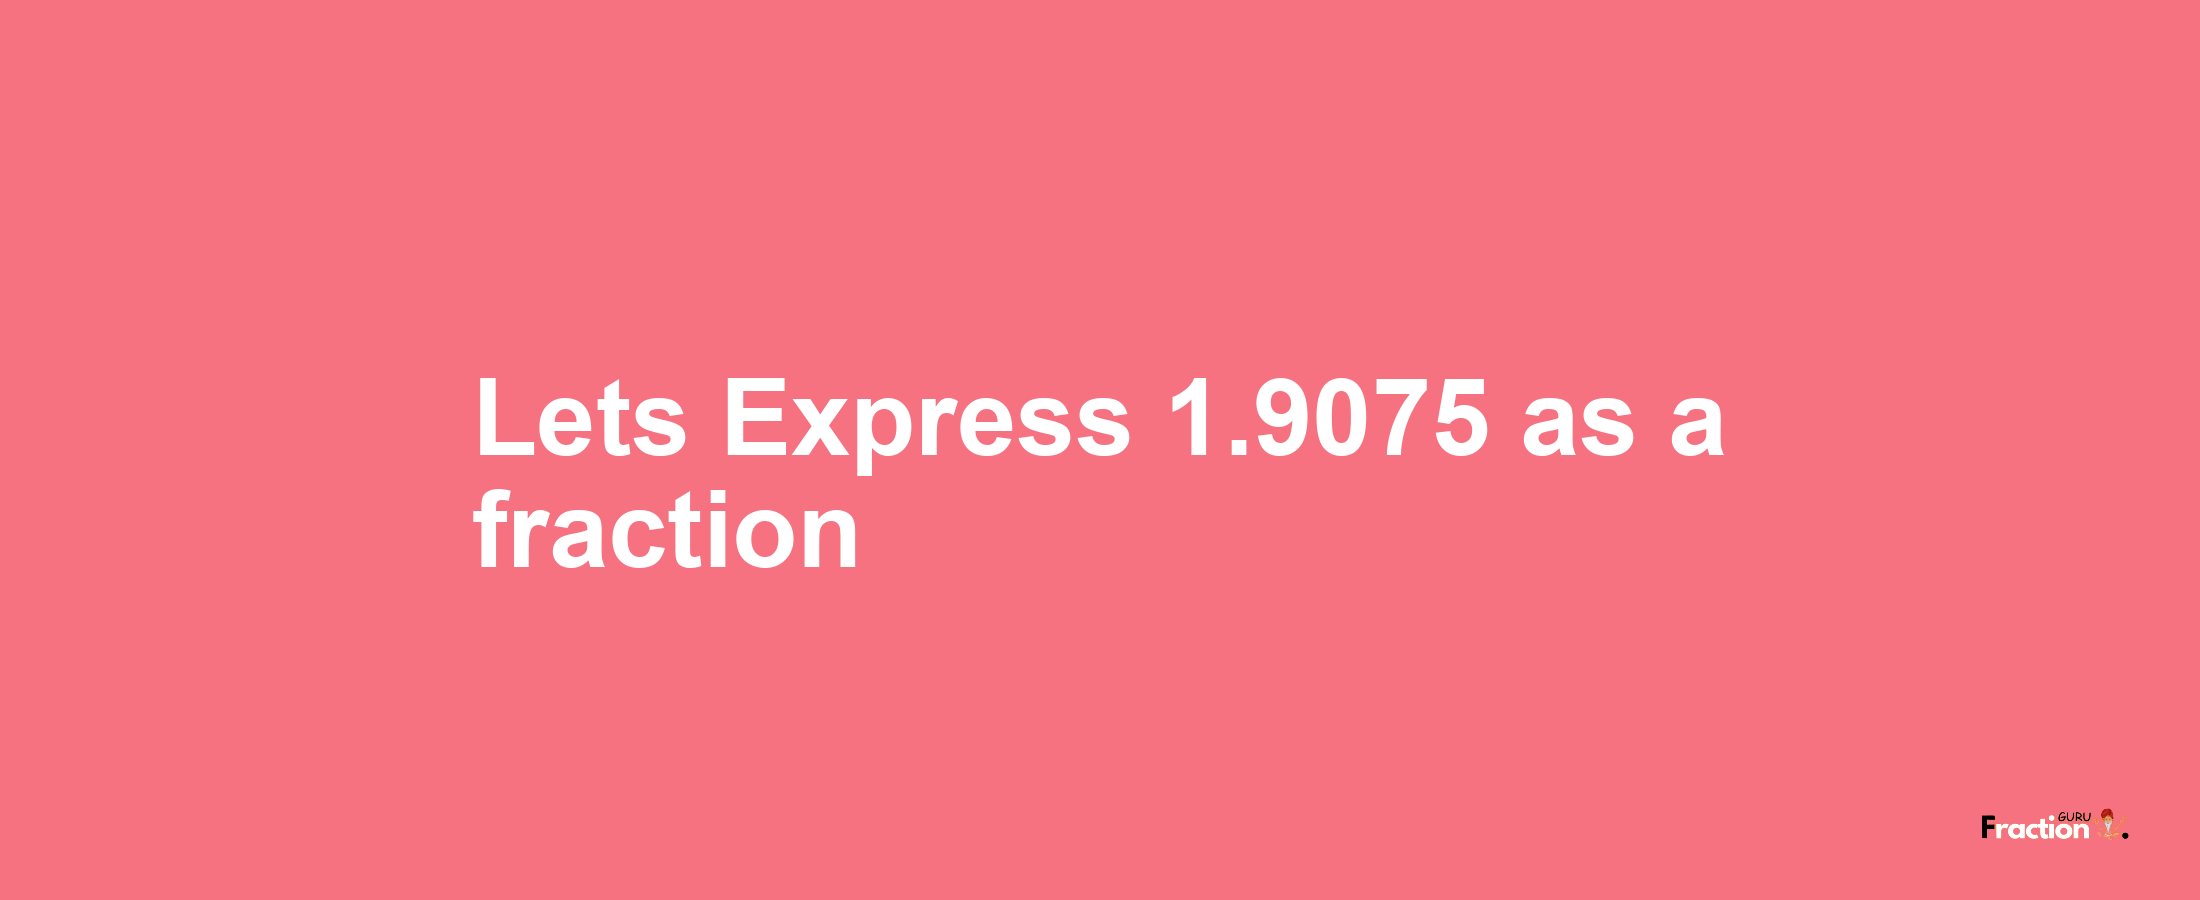 Lets Express 1.9075 as afraction